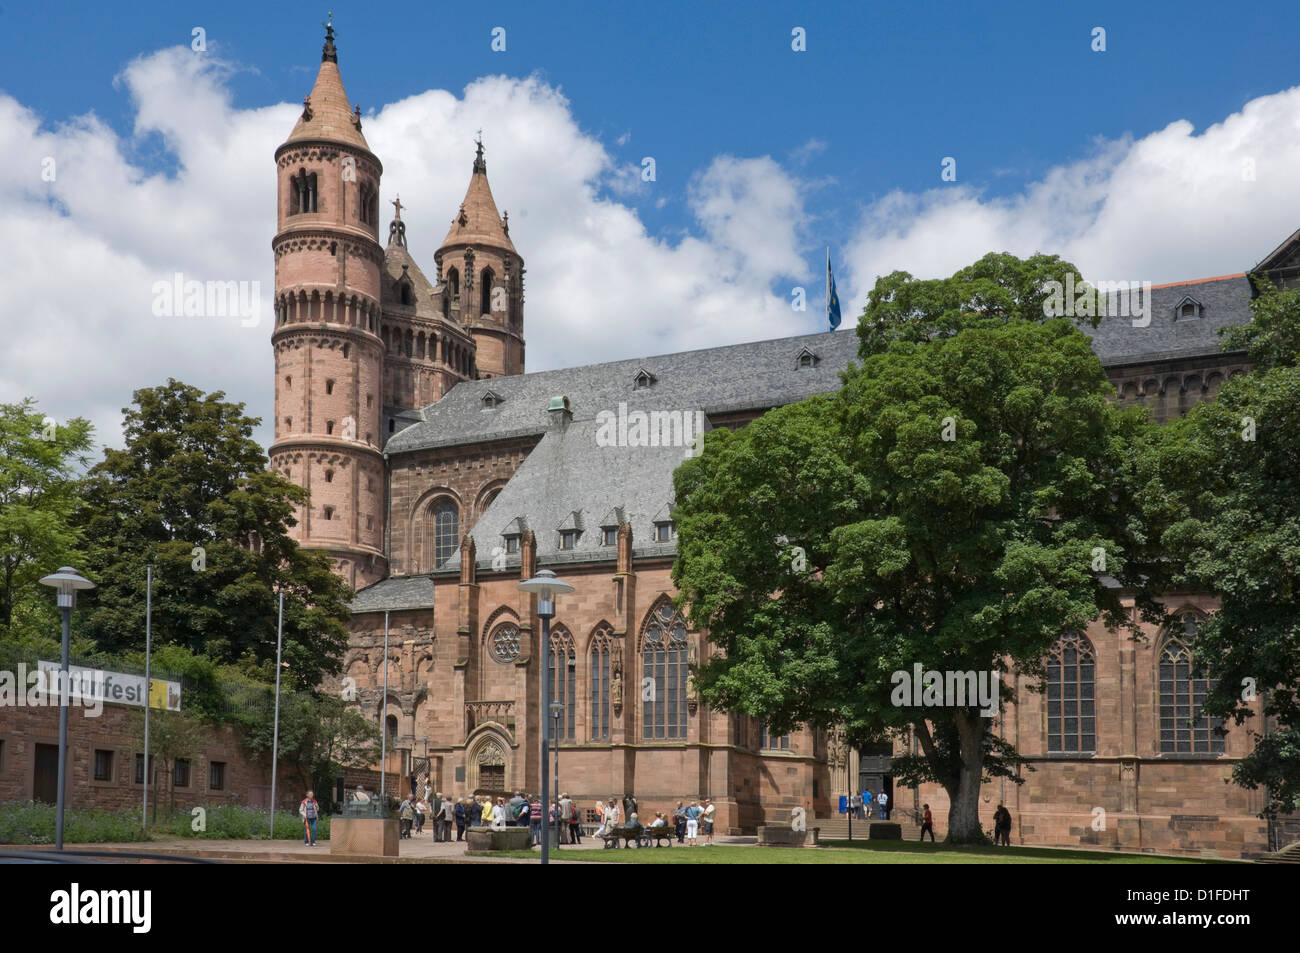 The New-Romanesque Cathedral of St. Peter, Worms, Rhineland Palatinate, Germany, Europe Stock Photo